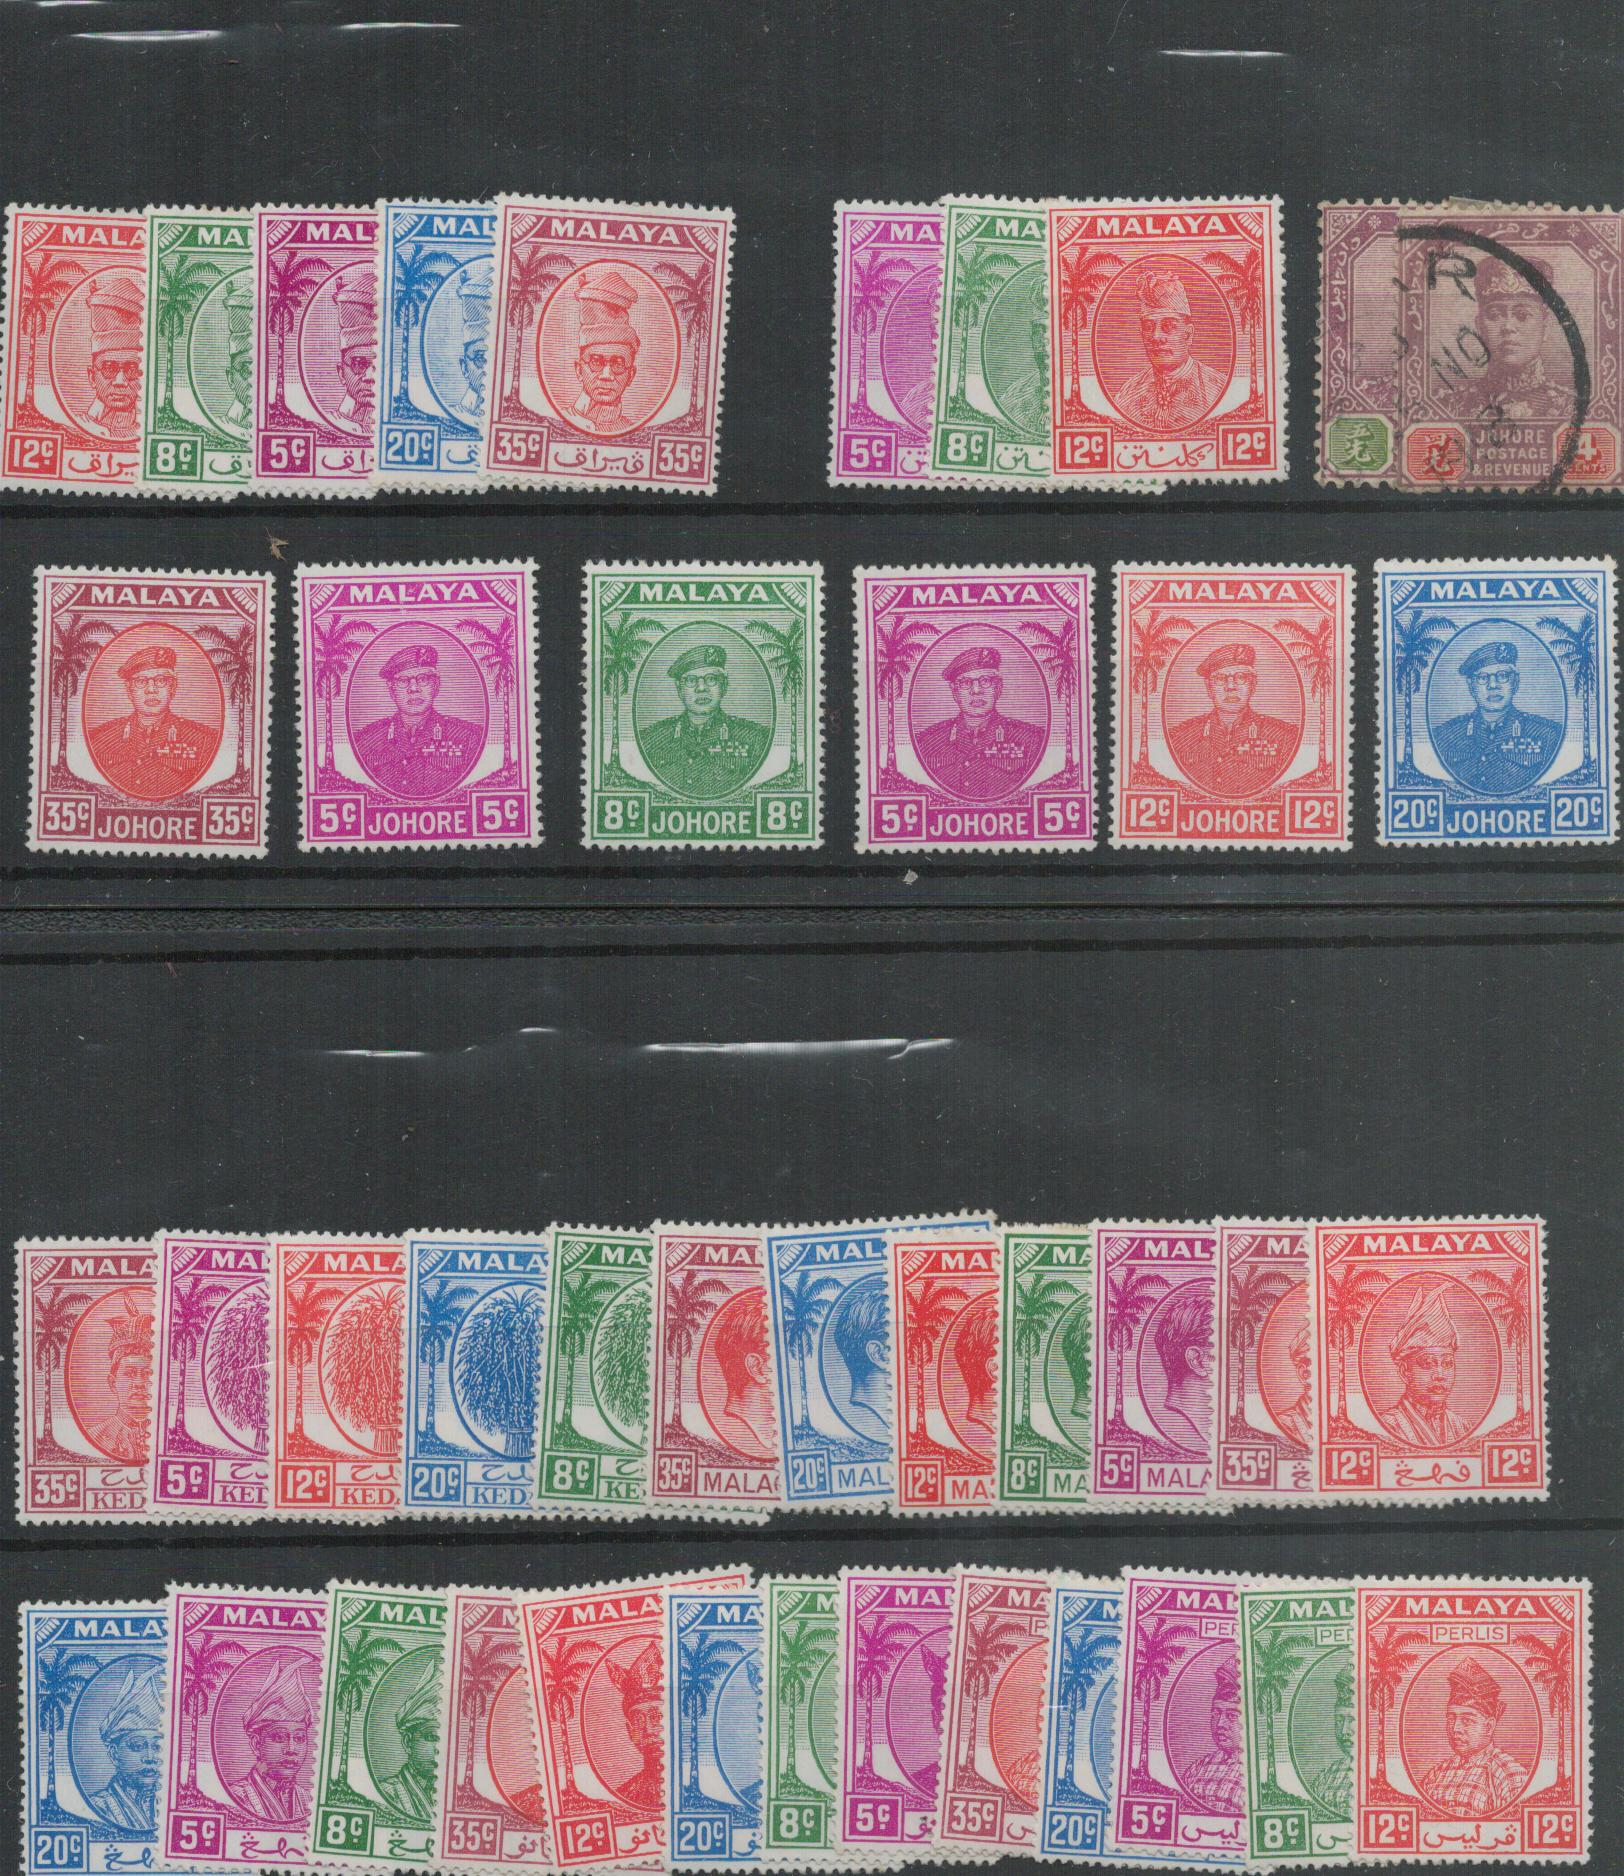 4 Stockcards mainly UNMT Mint states of Malaya approx 80 stamps. Good condition. All autographs come - Image 2 of 2